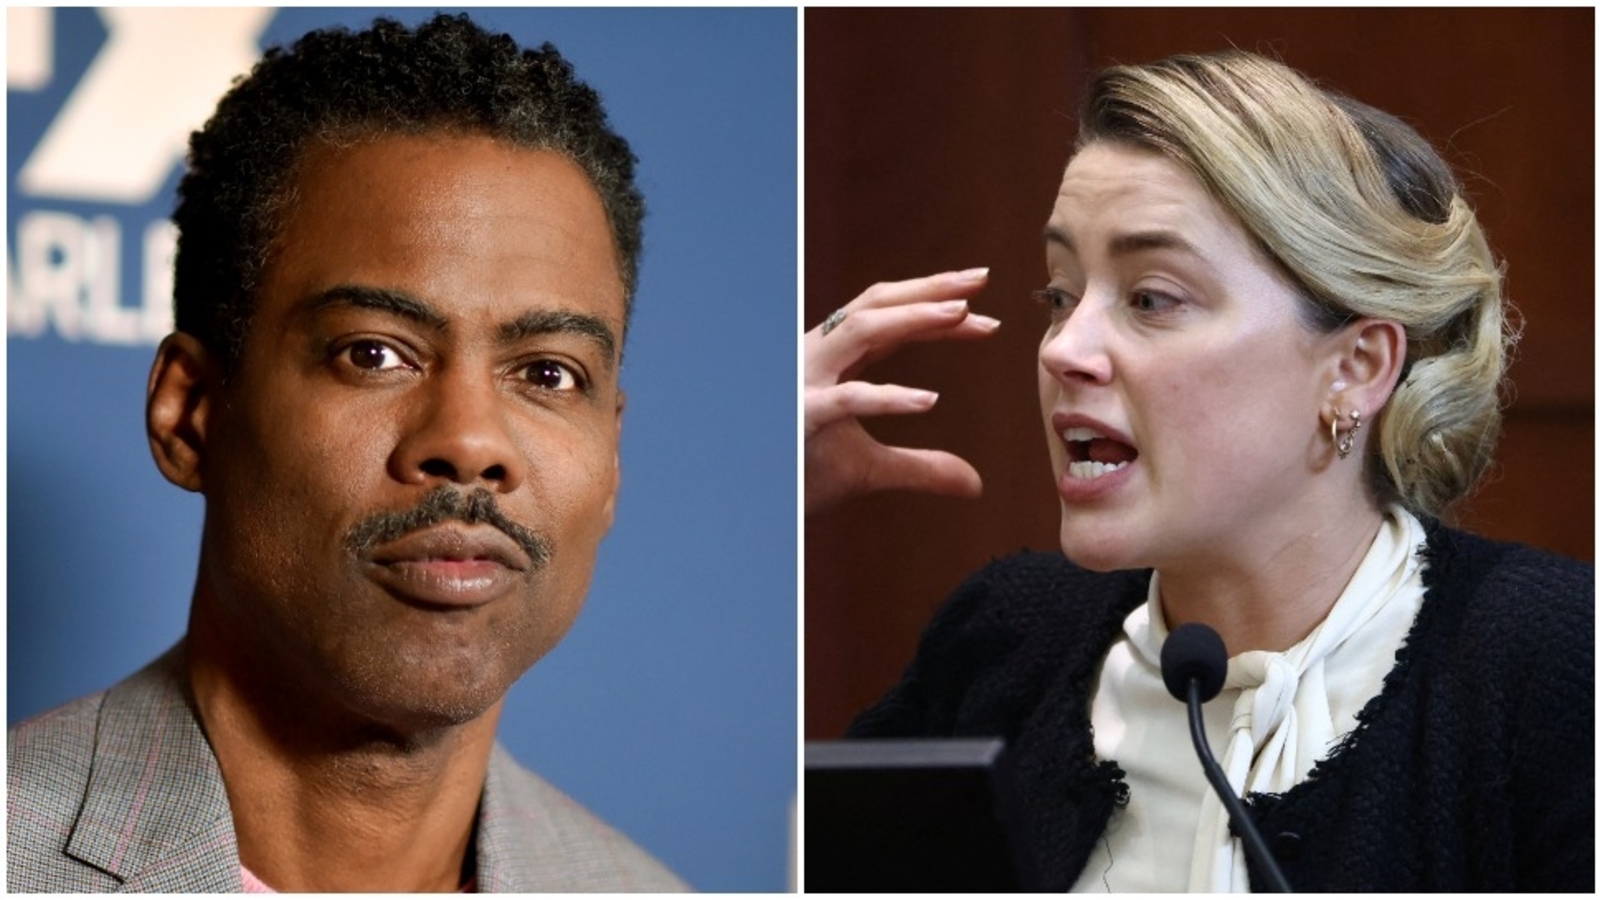 Chris Rock Mocks Amber Heard During London Stand-up, Saying ‘Once You Doo-Doo in Someone’s Bed, You Guilty of Everything’